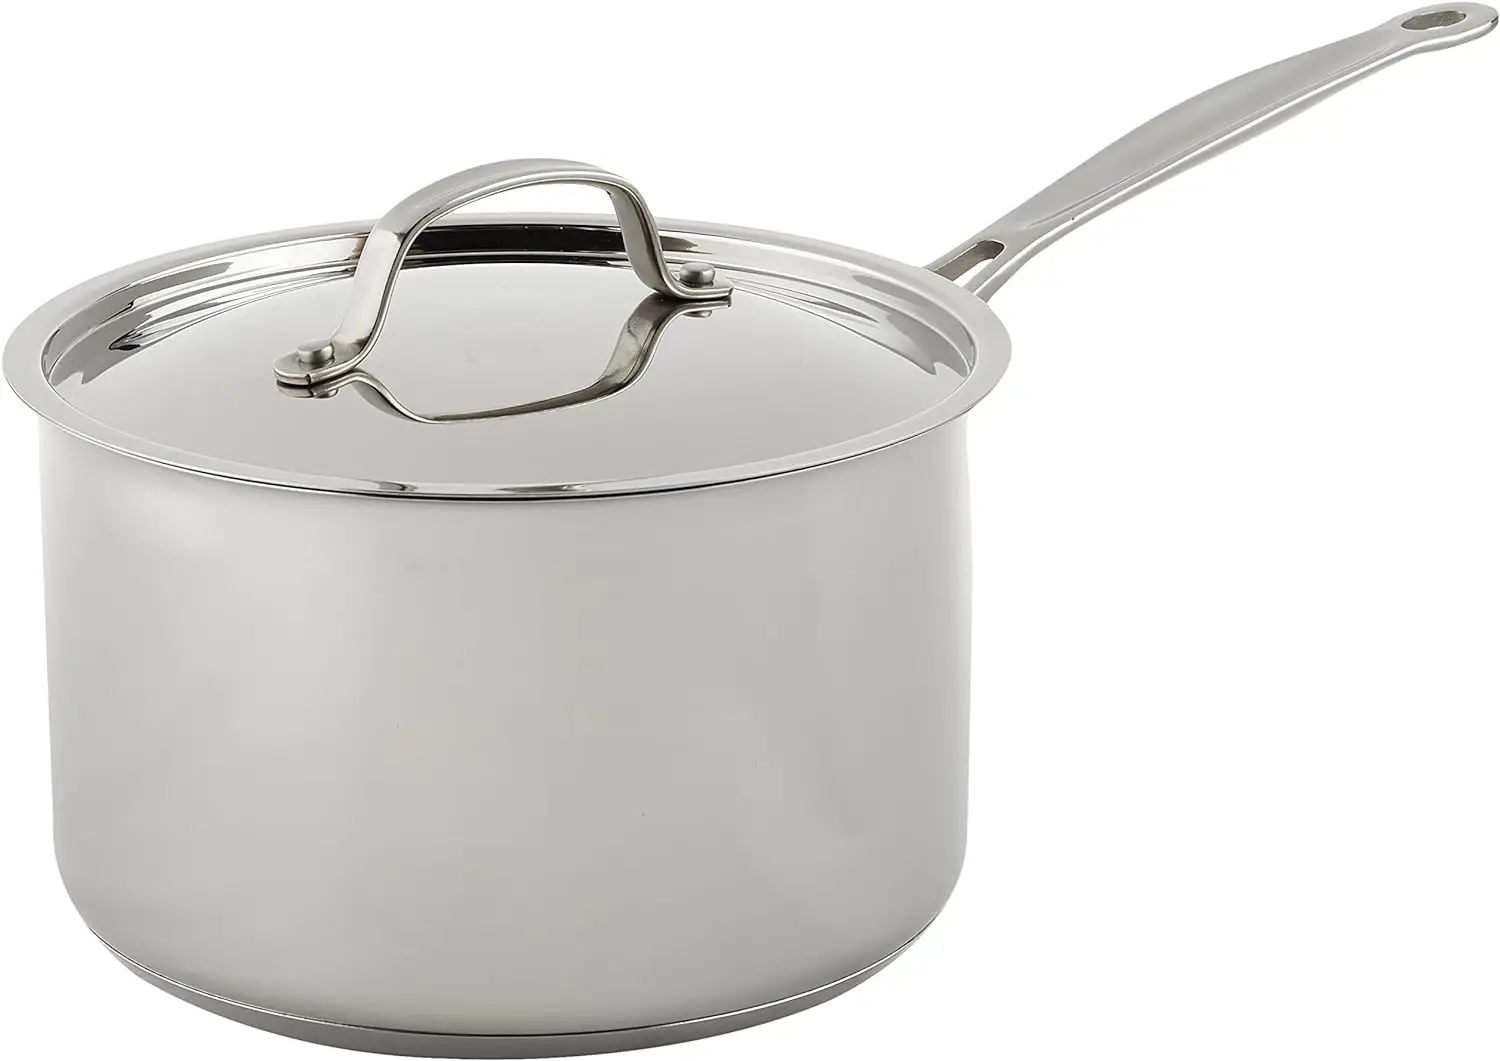 

Chef's Classic Stainless 4-Quart Saucepan with Cover Cooking glass pot Stainless steel Big pot for cooking Pancake pan Stainless